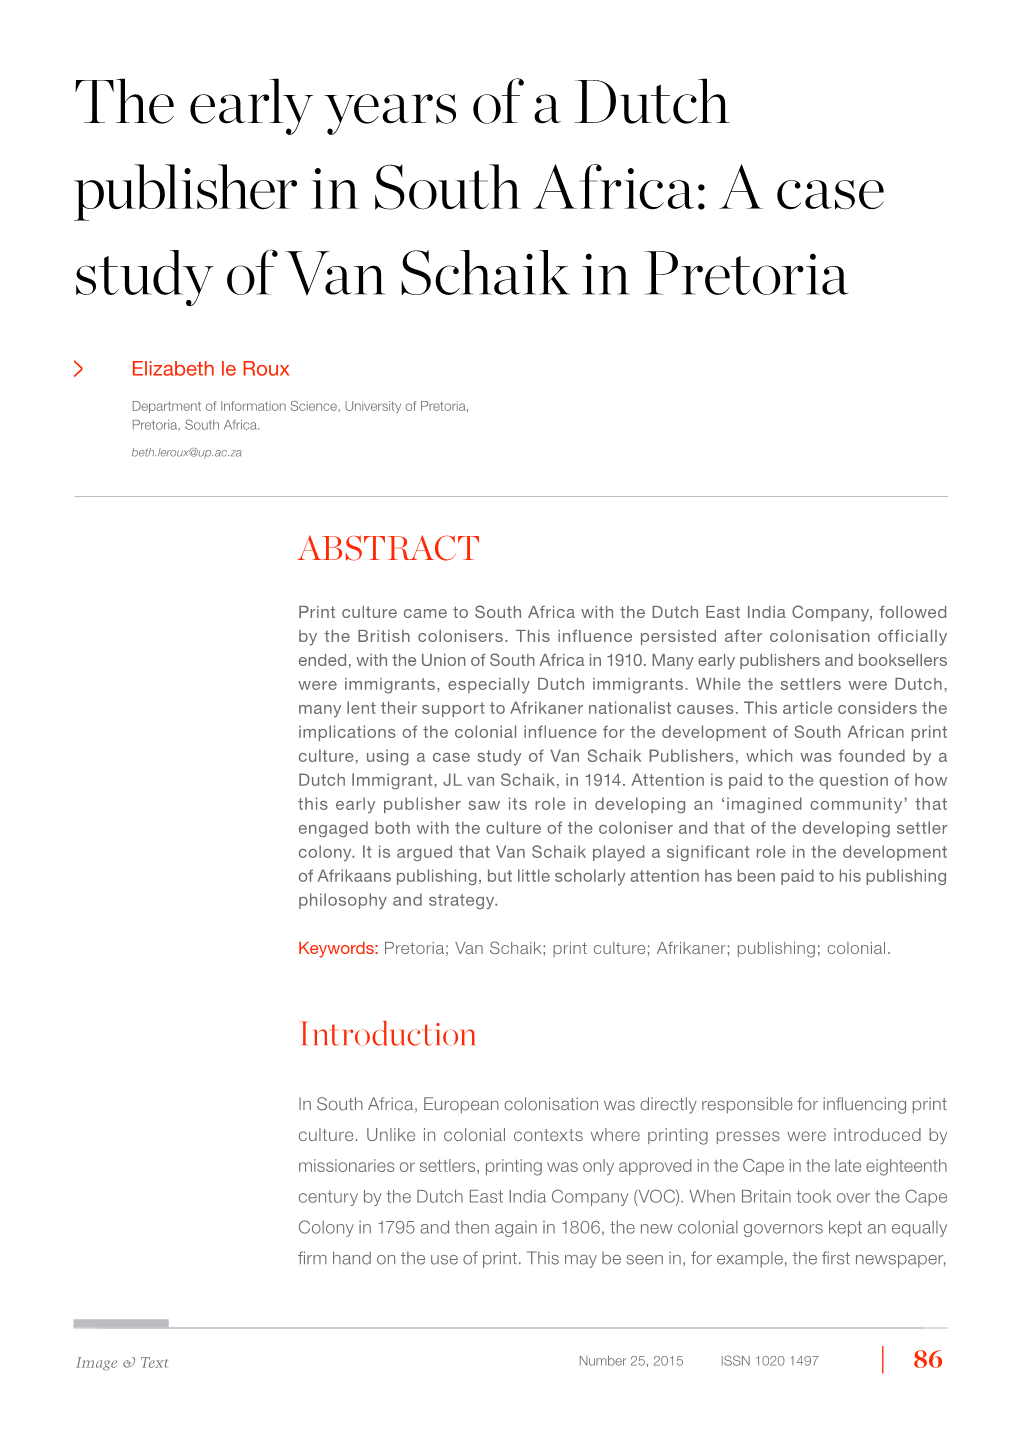 The Early Years of a Dutch Publisher in South Africa: a Case Study of Van Schaik in Pretoria